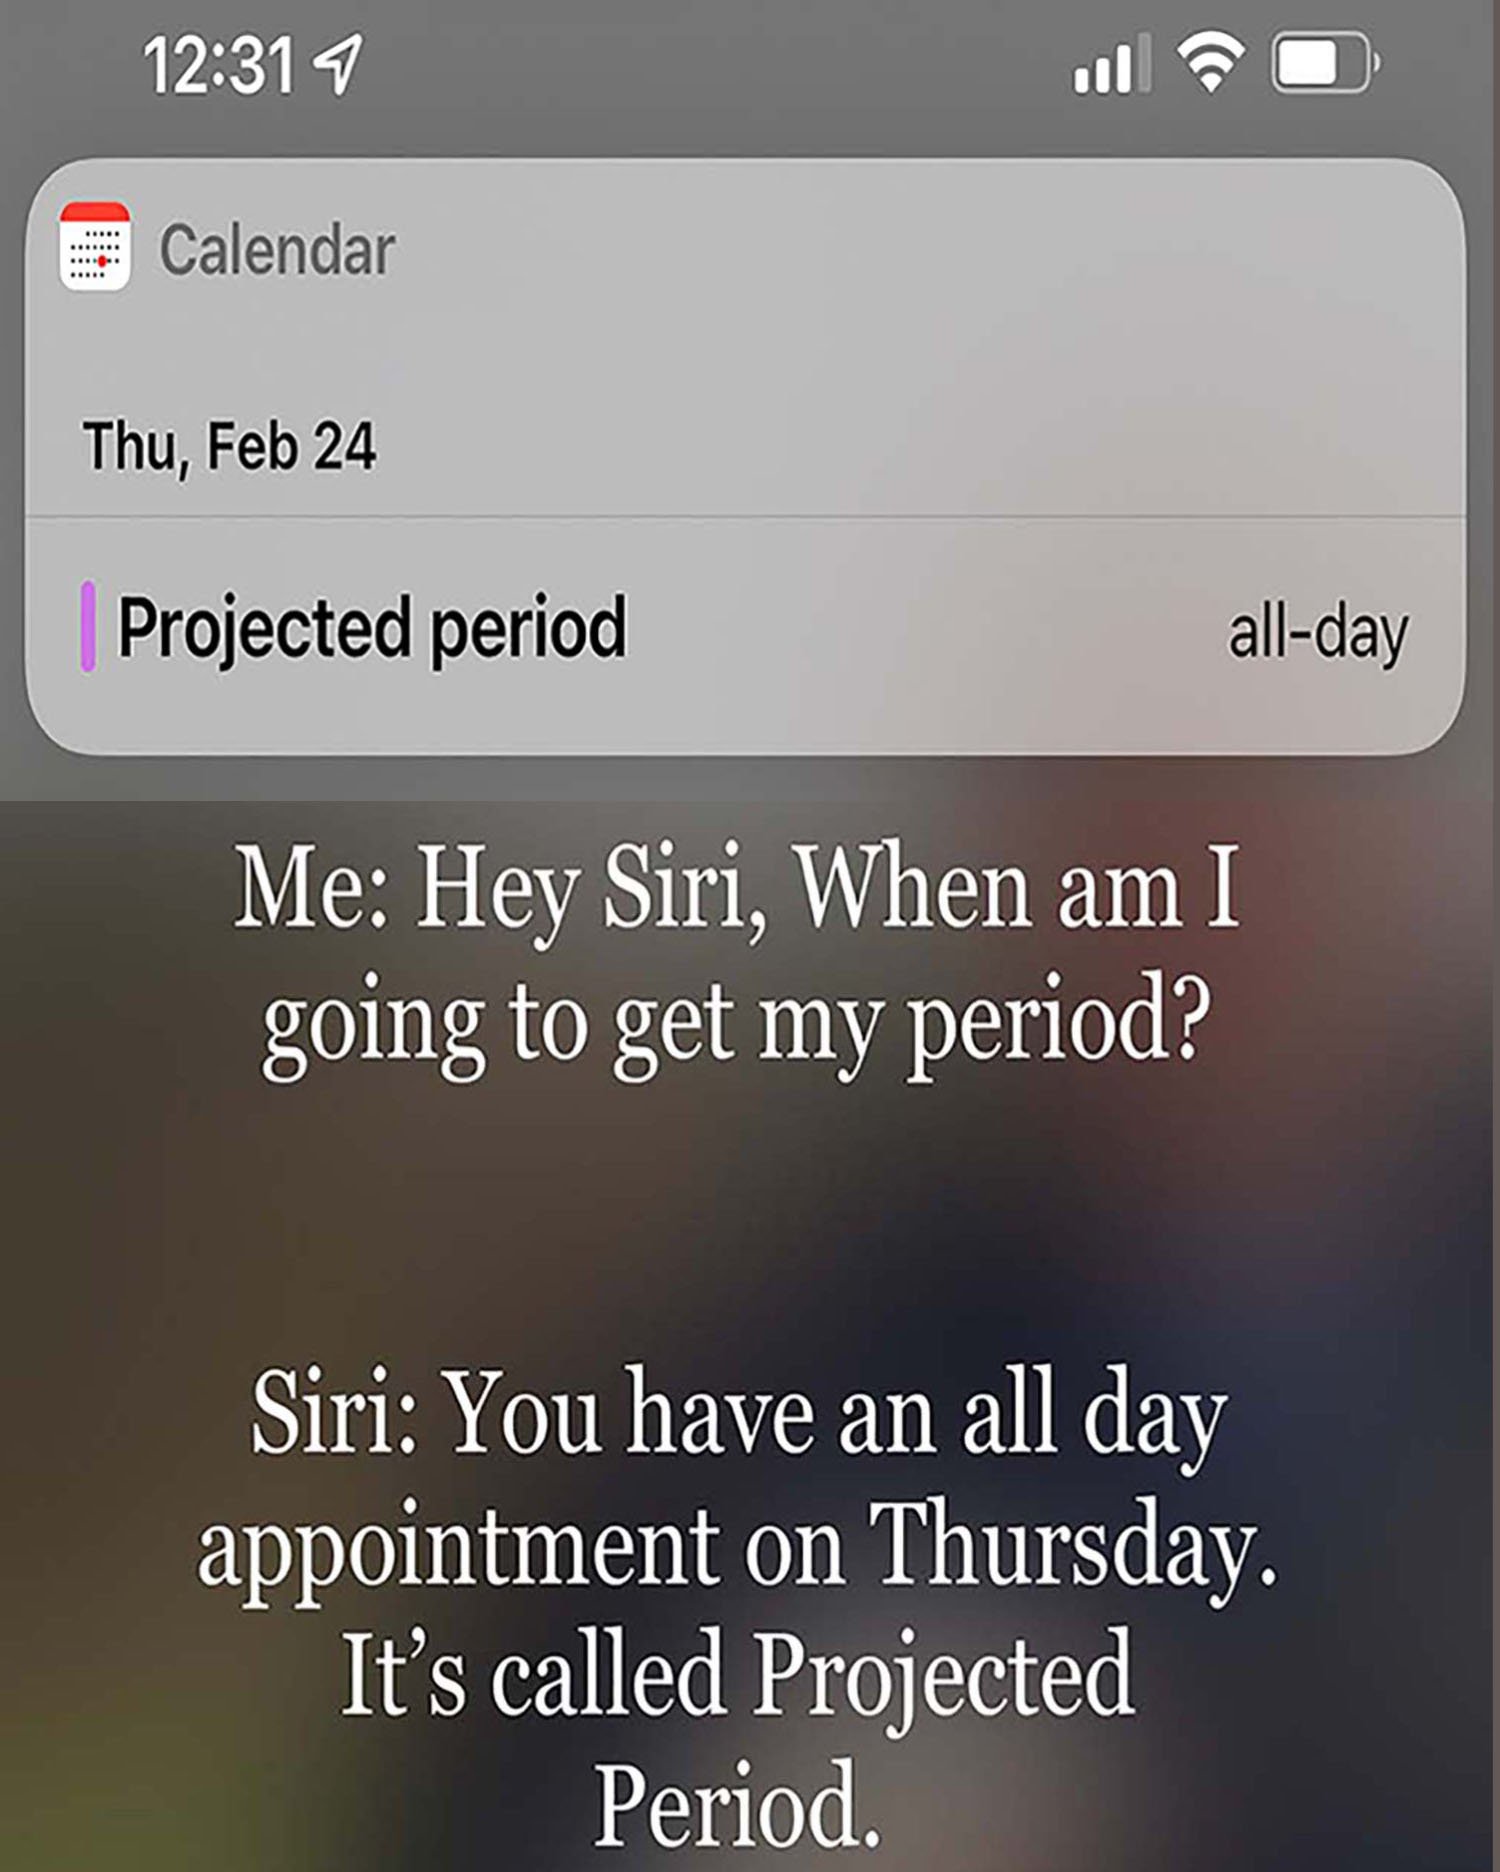 Screenshot of iPhone screen with calendar appointment named “Expected Period” on February 24, 2022. Text underneath reads, Me: “Hey Siri: when am I going to get my period?” Siri: “You have an all day appointment on Thursday. It’s called Projected Period.”